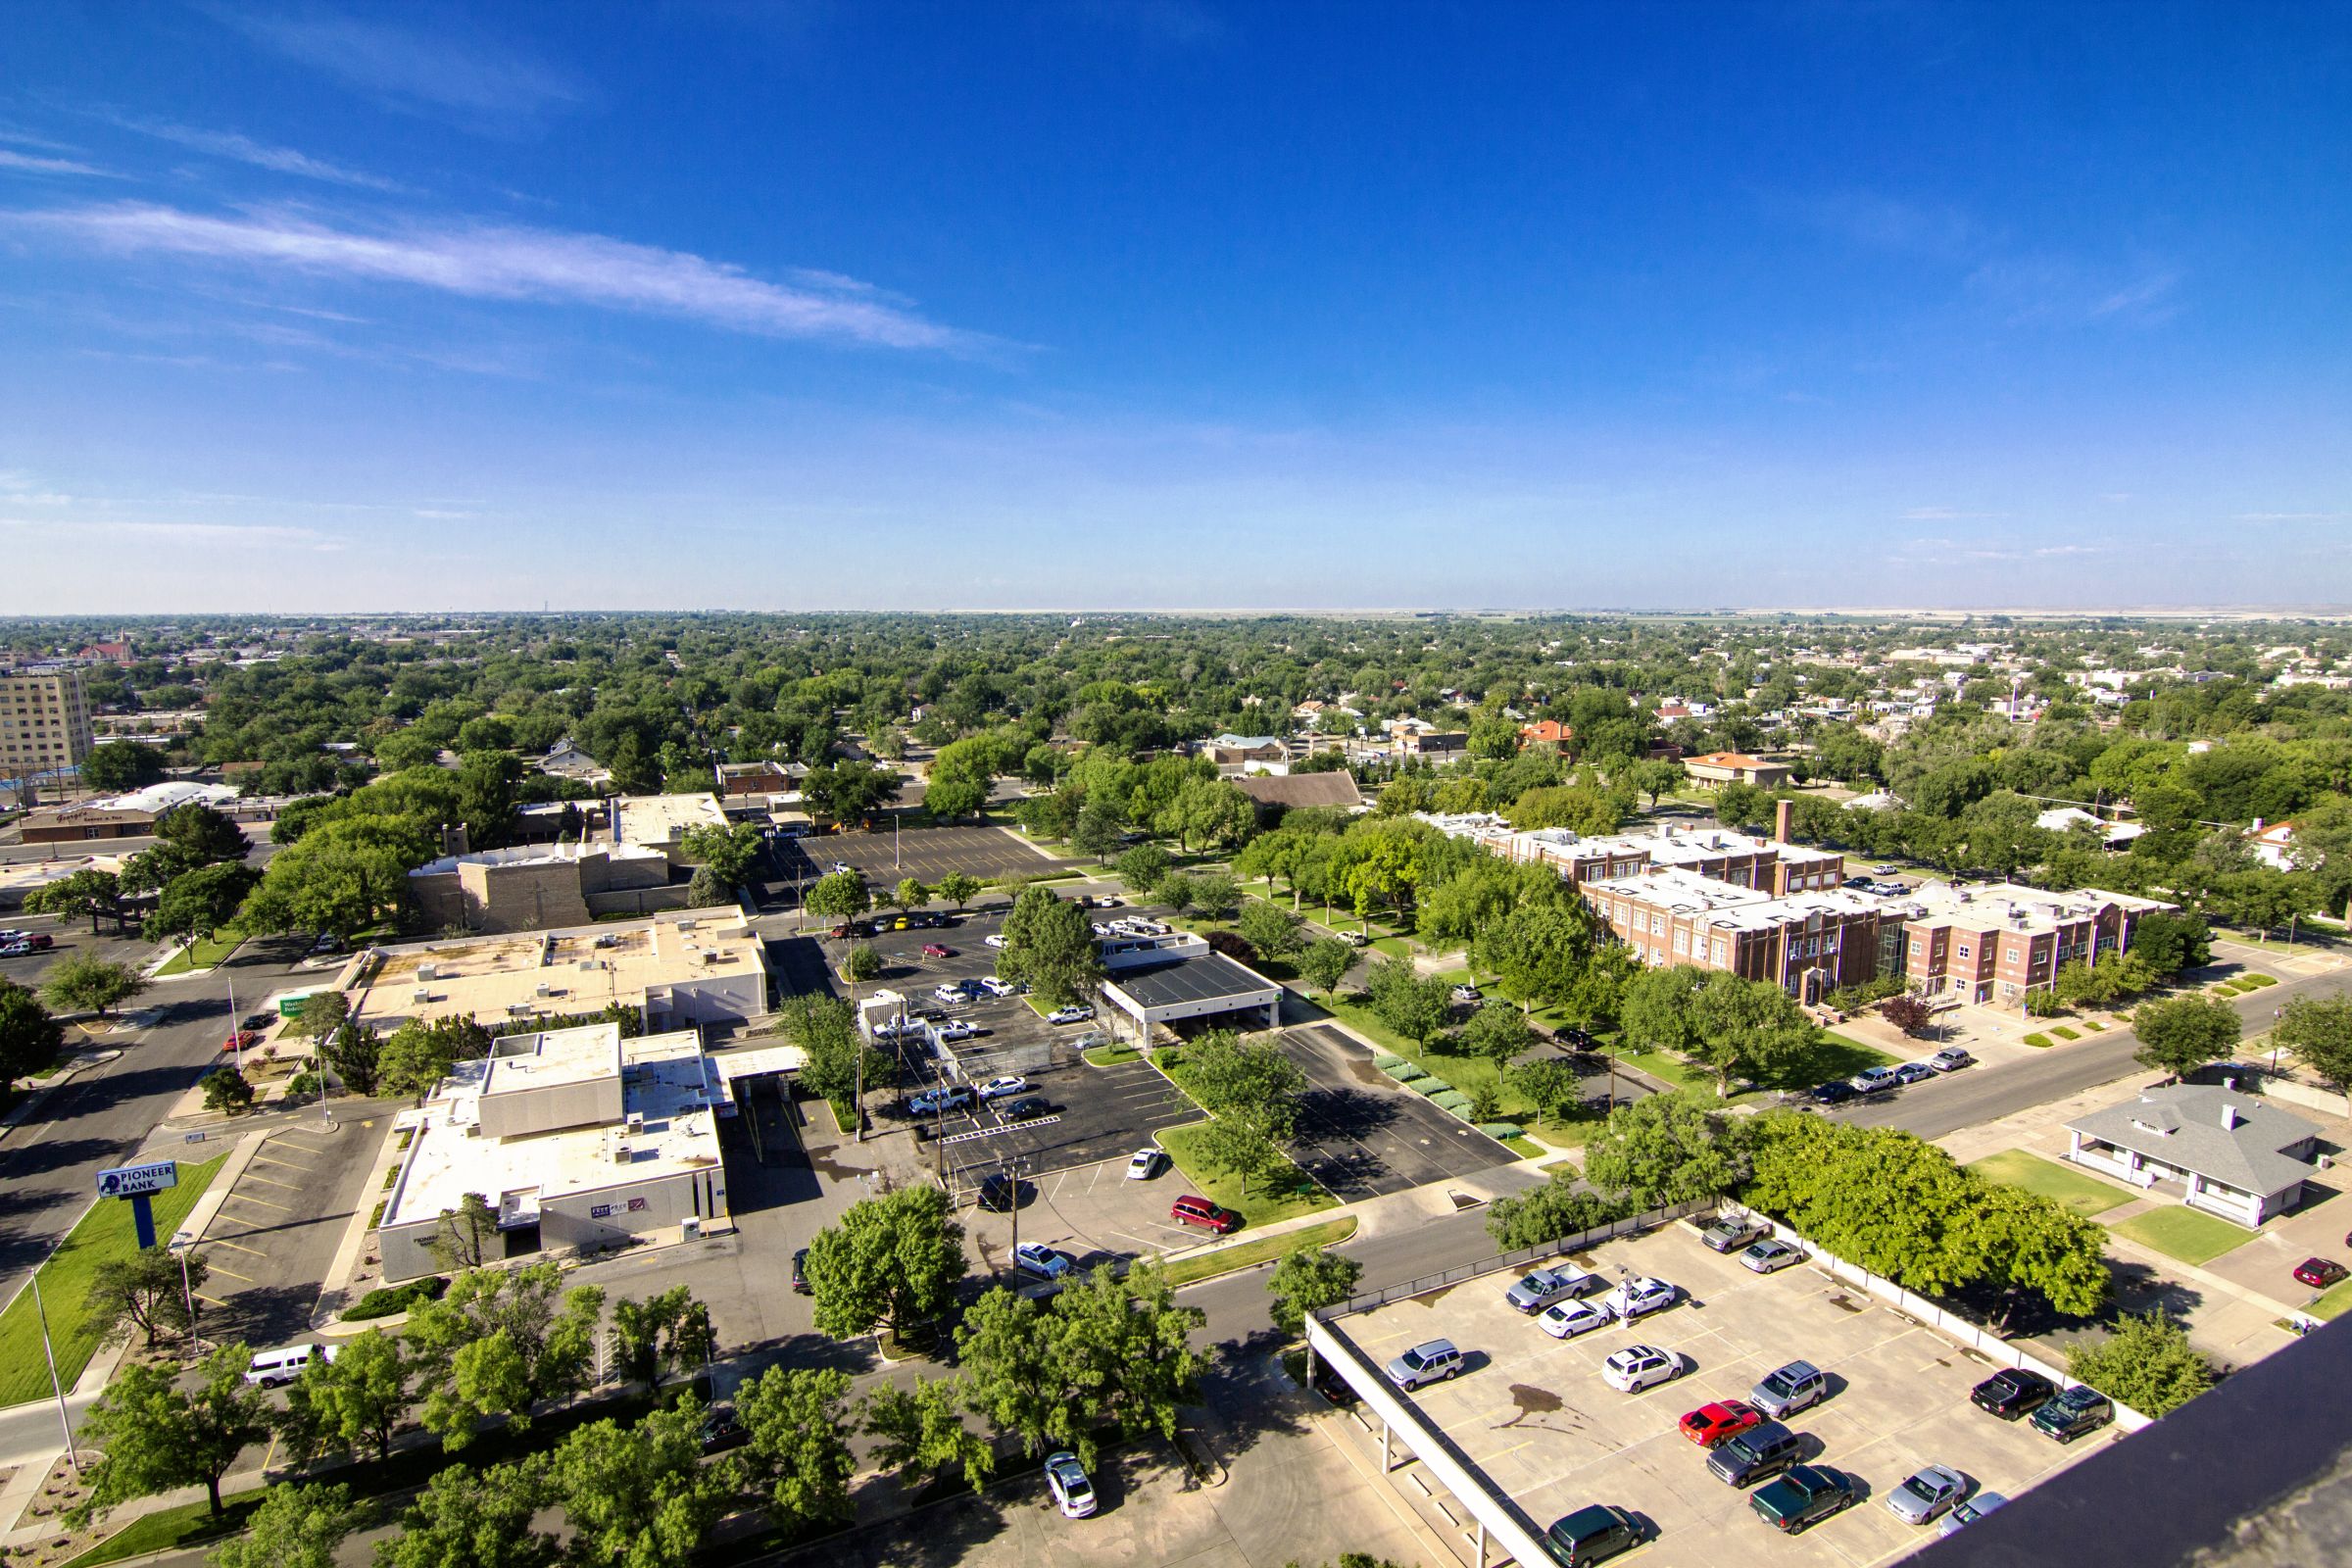 Roswell Aerial's image